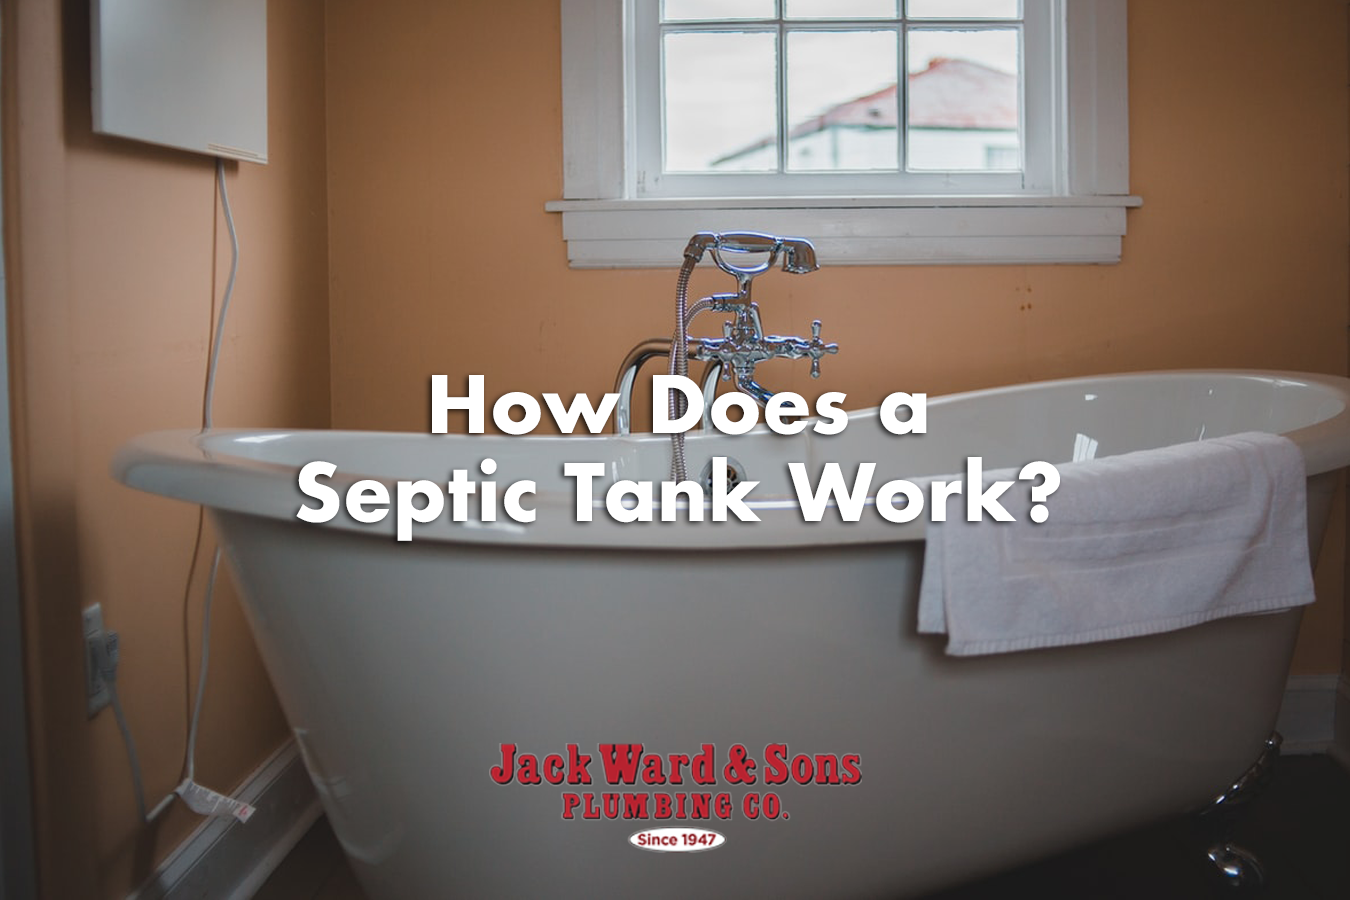 white bathtub in peach painted bathroom with text reading "how does a septic tank work?" in white letters